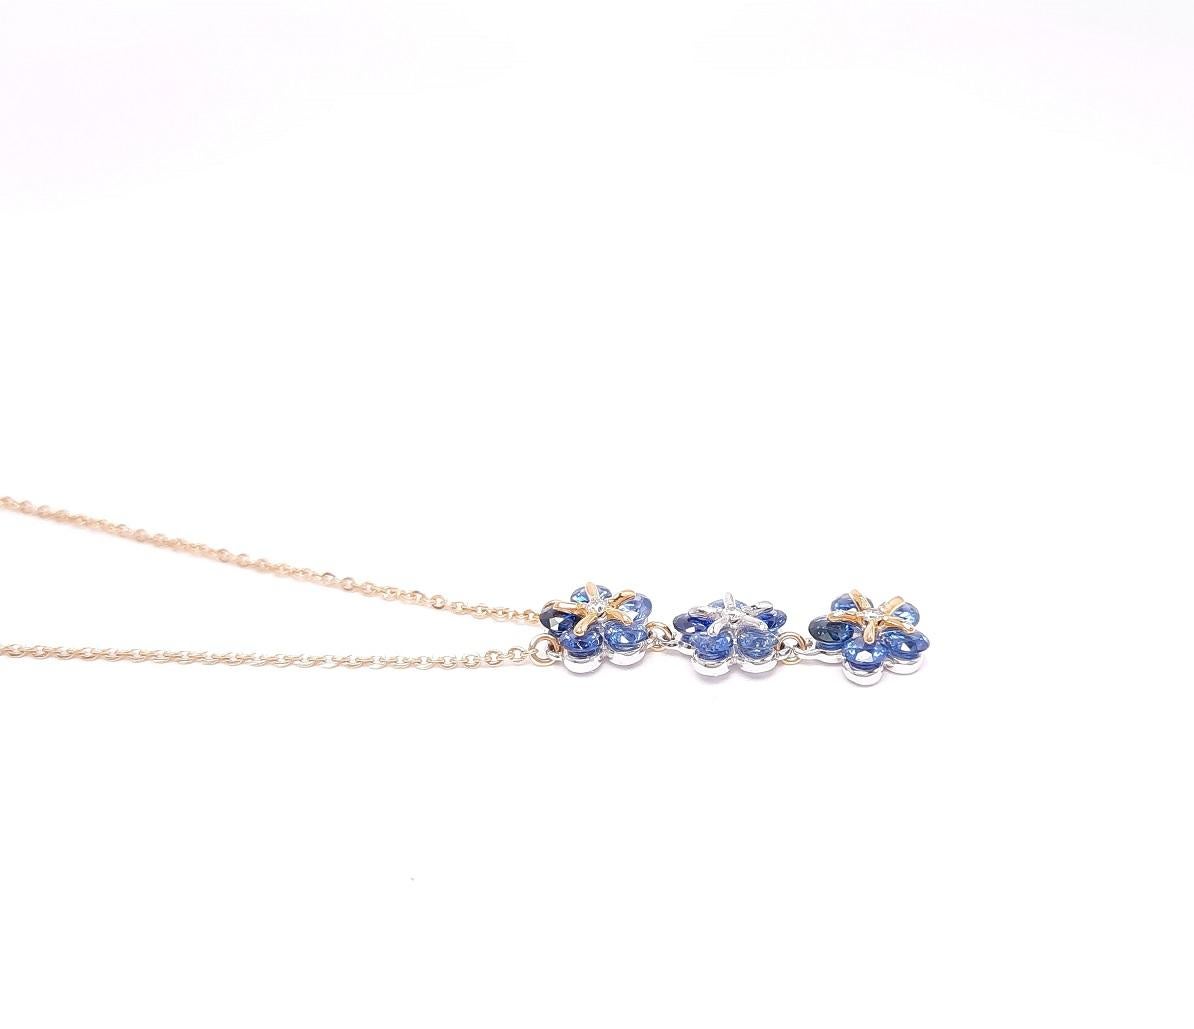 Diamond-cut blue sapphires are mounted carefully in delicate flower design, applied in the innovative stone setting technology.  Swinging flowers of sapphires shine extraordinarily, trembling for the joy of Spring.

Internationally patented,